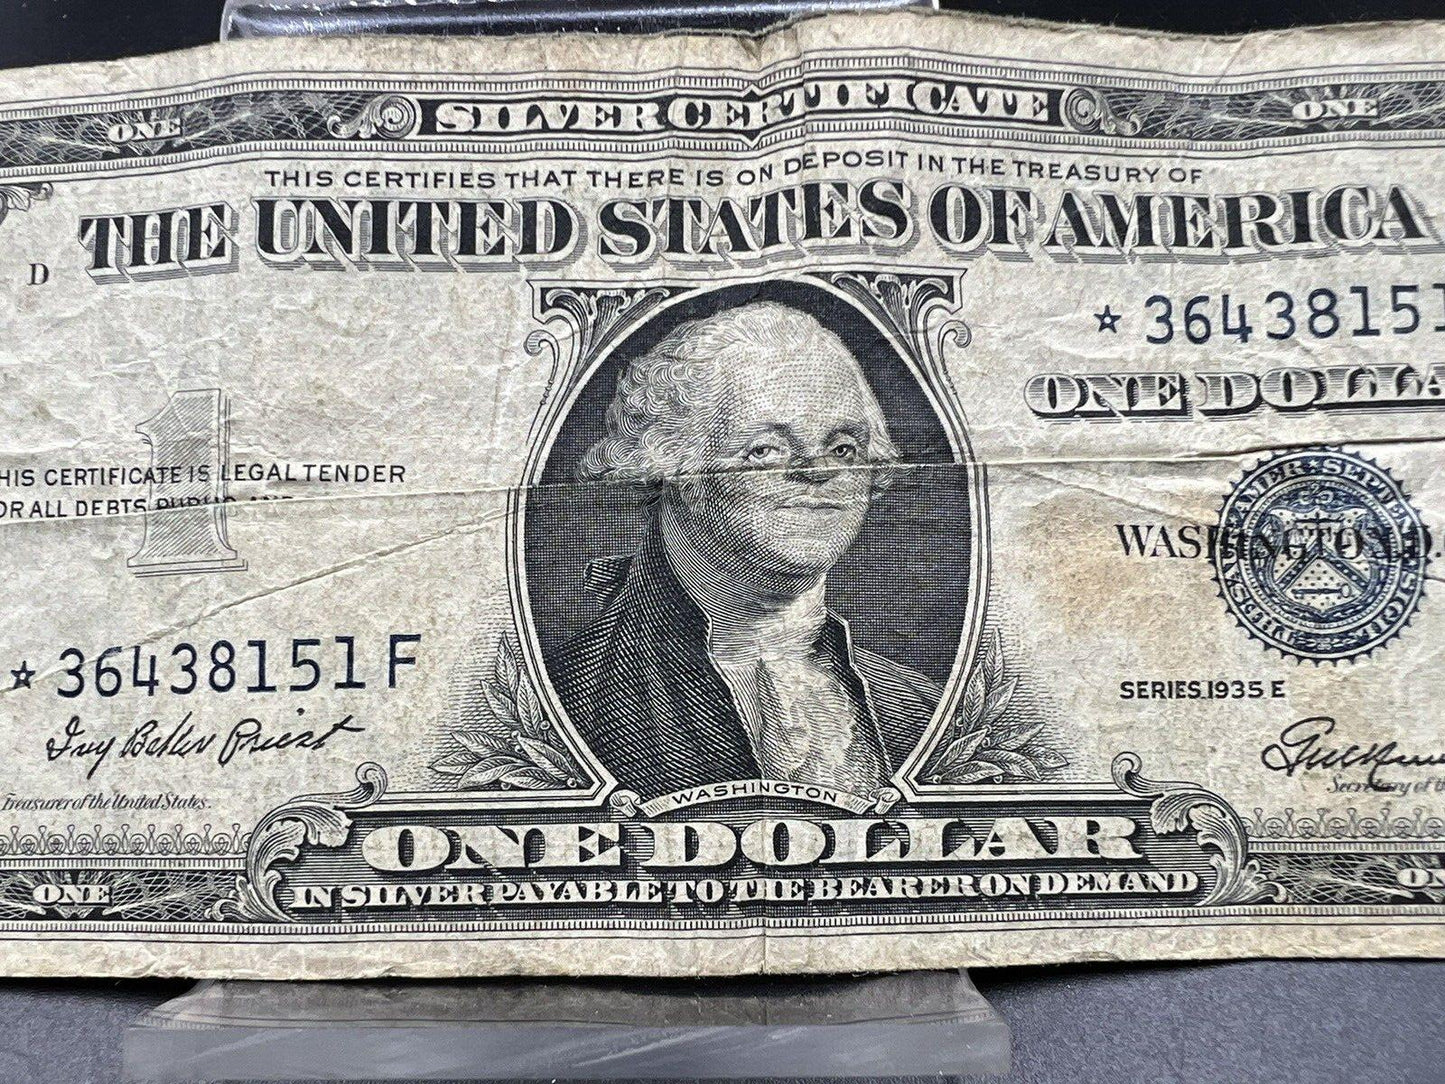 1935 E $1 US Silver Certificate Note Bill With Humorous fold G / VG circ